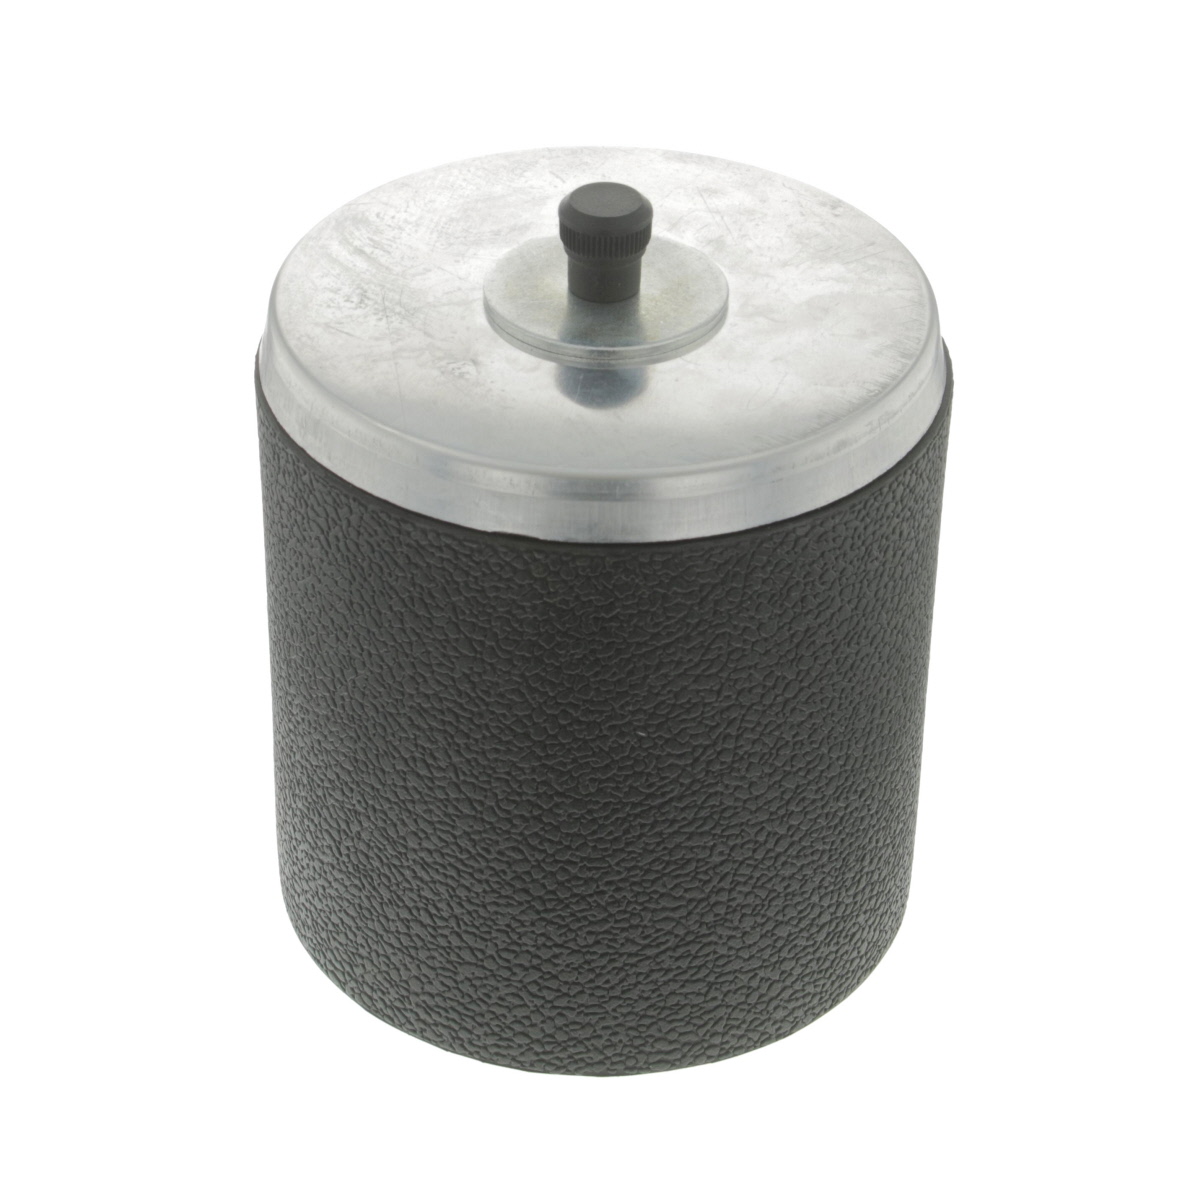 Wirejewelry Single Barrel Rock Tumbler With 3 Pound Capacity Drum 